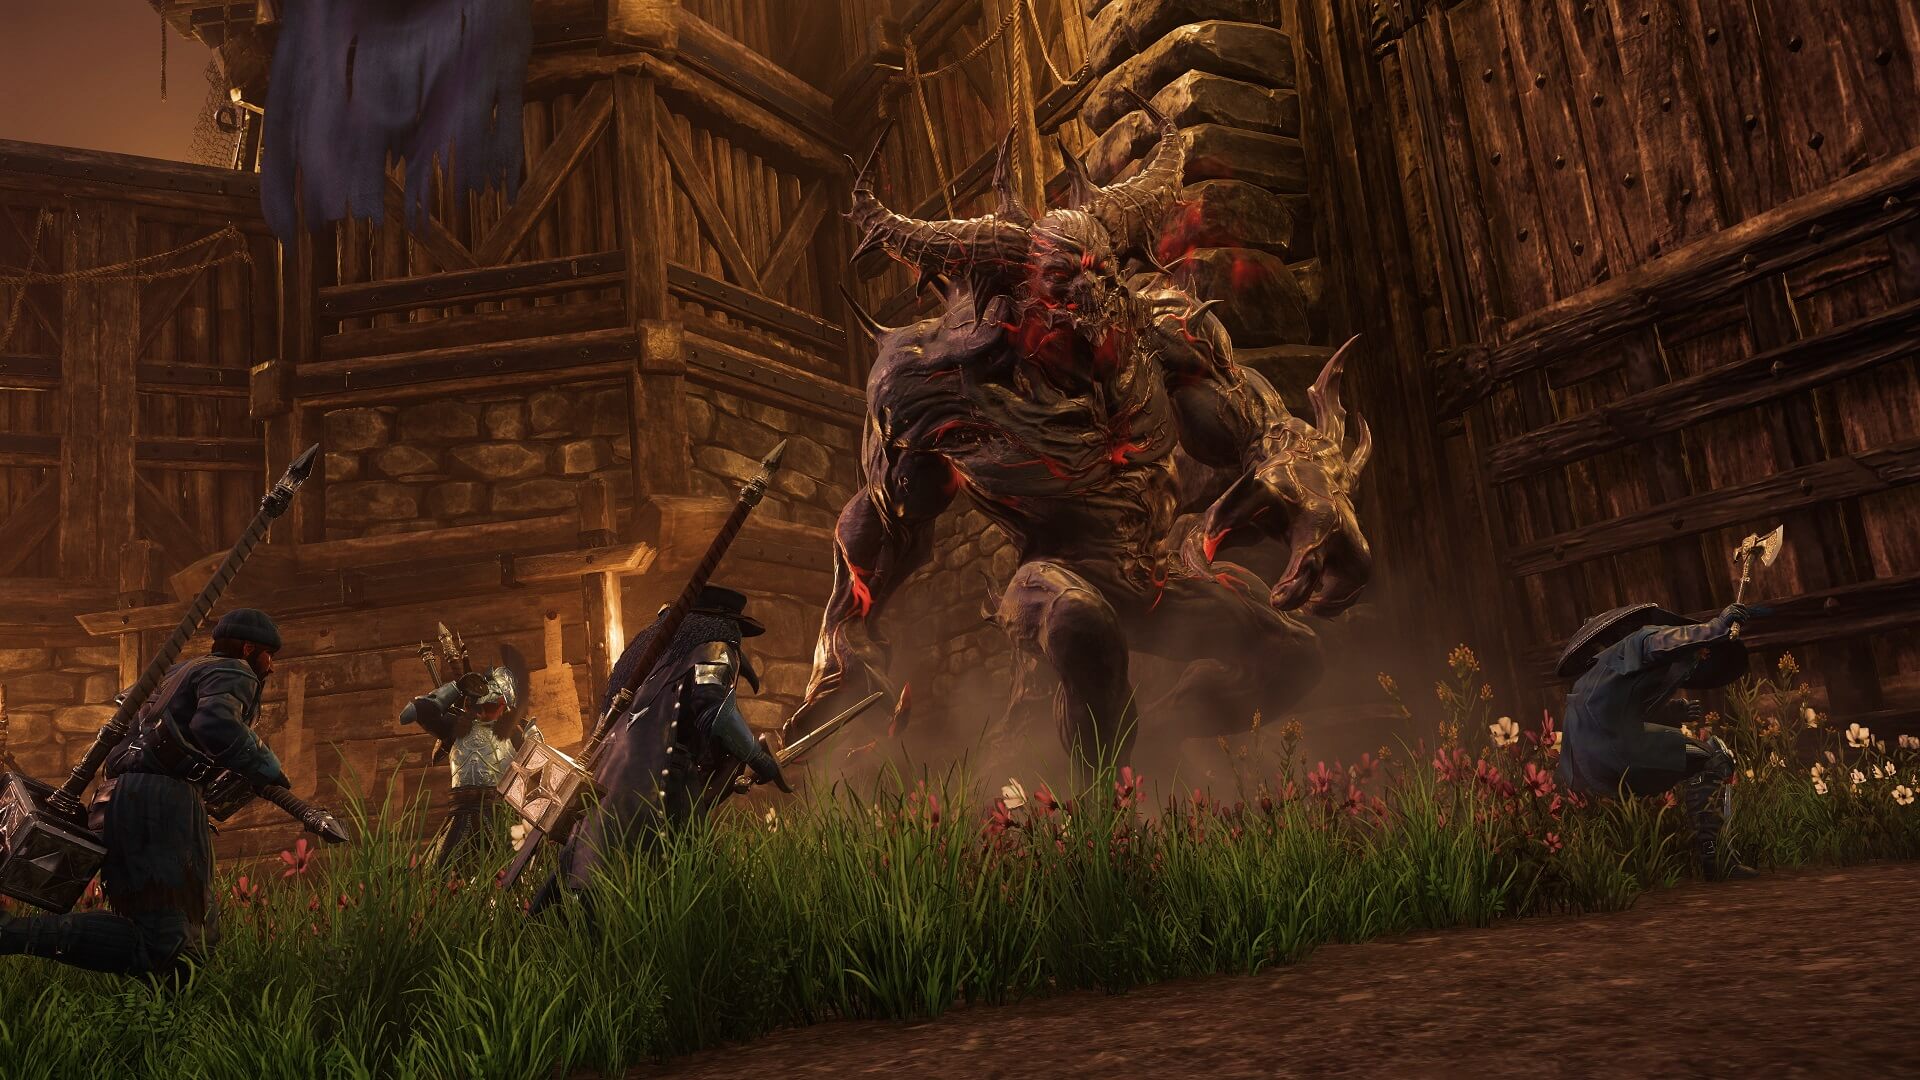 Players facing off against a monster in New World